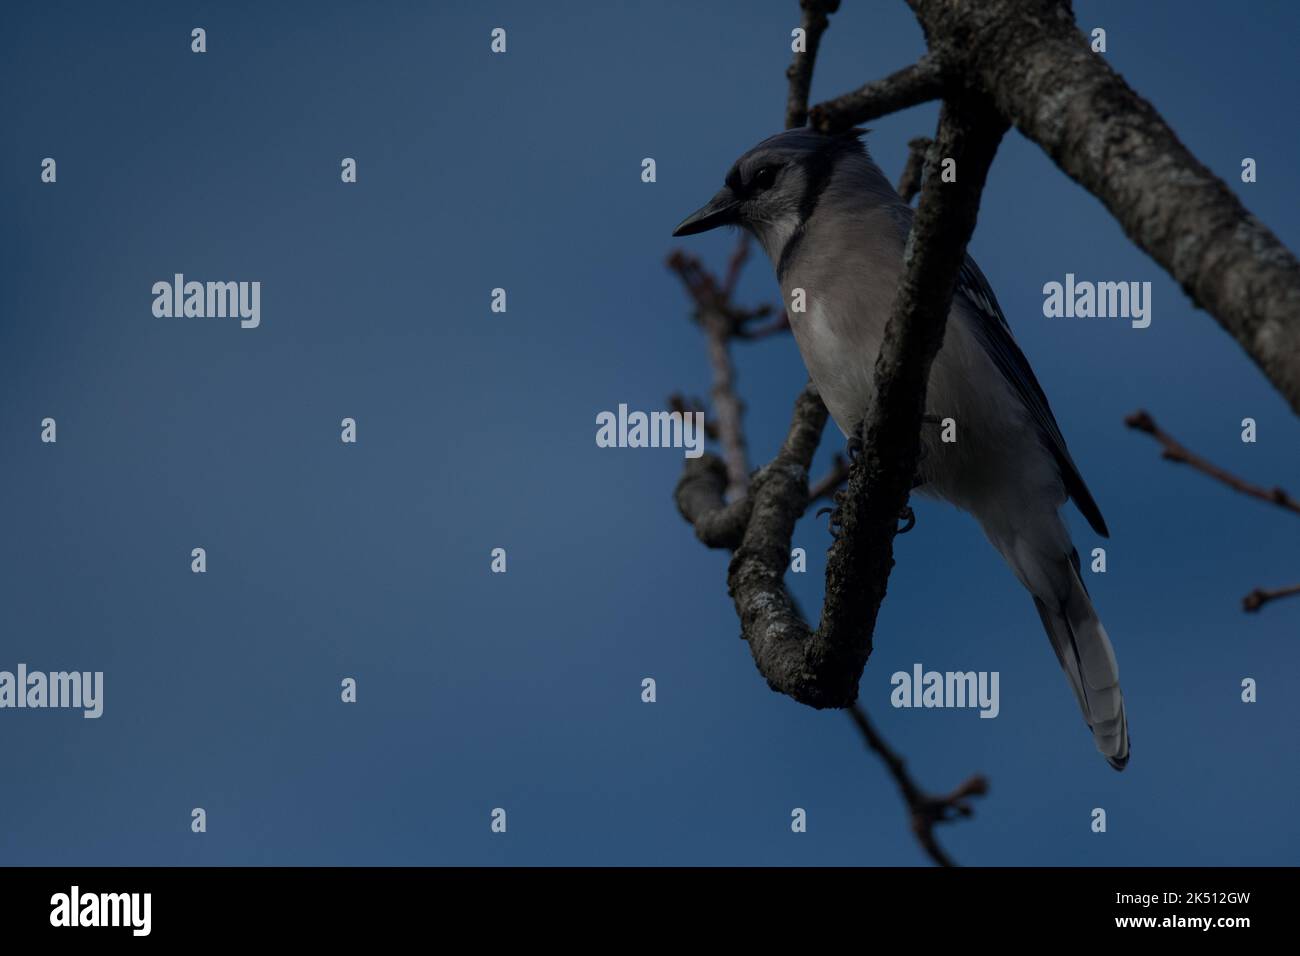 Blue jay perched on a branch with empty sky background Stock Photo